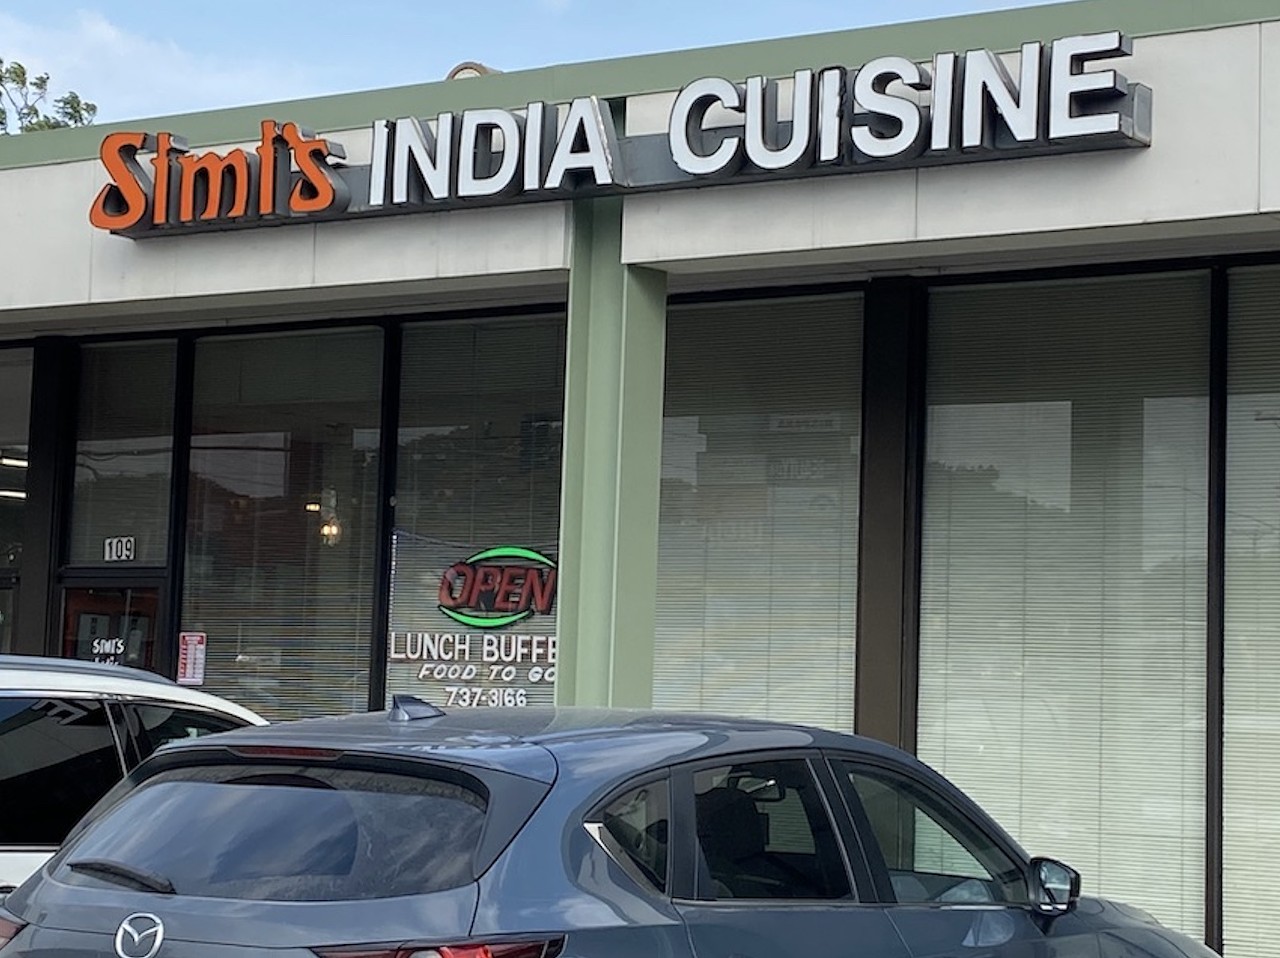 Simi's India Cuisine
4535 Fredericksburg Road #109, (210) 737-3166, facebook.com/Simis-India-Cuisine-104962319547629
Those with special diets will feel more than welcome here thanks to a number of vegetarian dishes on the menu. The restaurant's delicious tandoori dishes amply prove why this spot is a go-to for Indian fare for many locals.